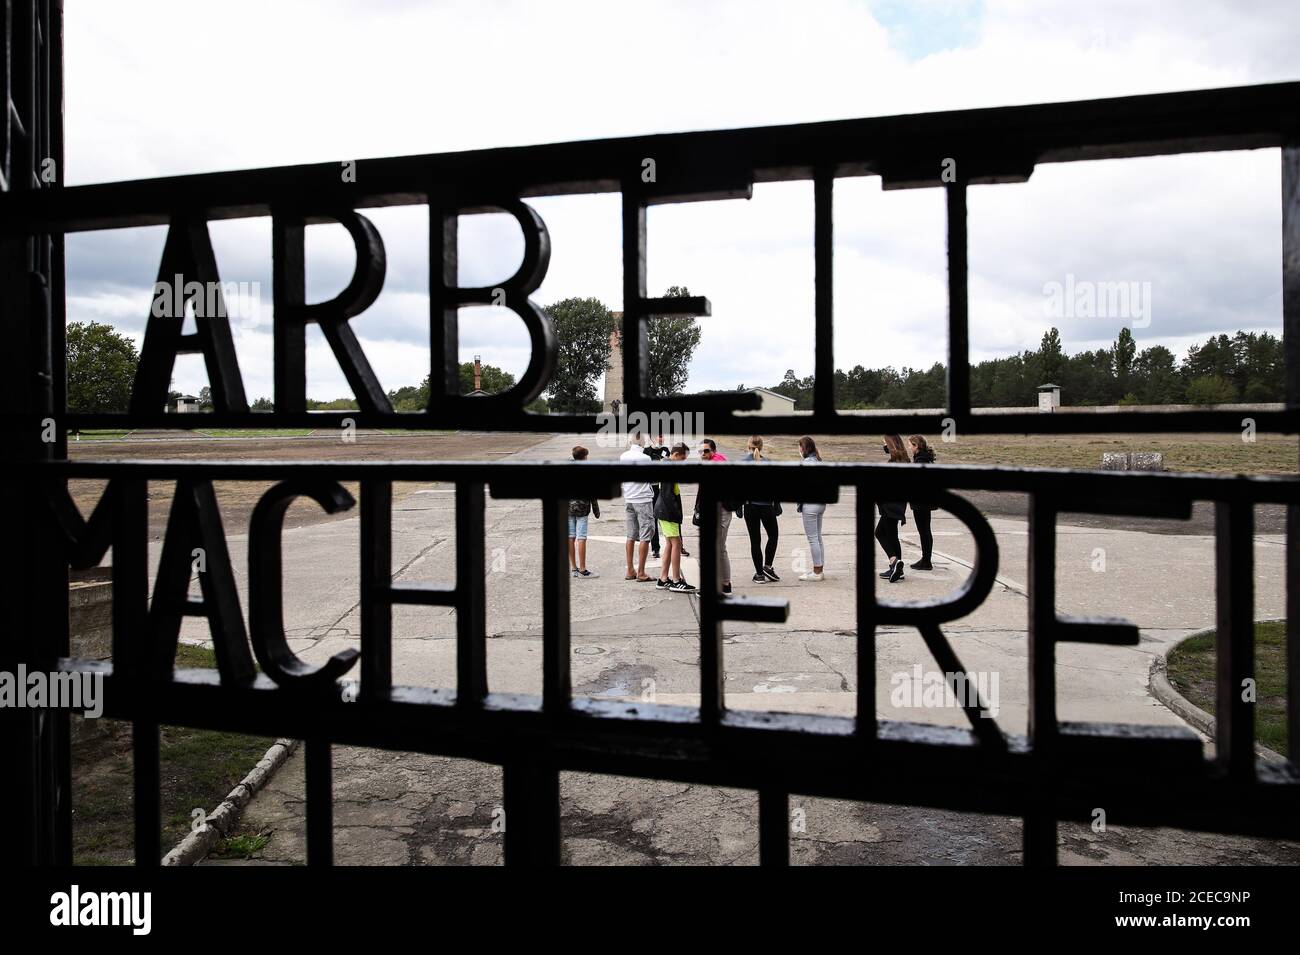 (200901) -- ORANIENBURG, Sept. 1, 2020 (Xinhua) -- Photo taken on Aug. 27, 2020 shows an entrance gate bearing the words 'Work makes (you) free' at the Sachsenhausen memorial in Oranienburg, Germany.  The Sachsenhausen concentration camp was built by the Nazis in Oranienburg in 1936. More than 200,000 people were interned at the facility between 1936 and 1945, and about 100,000 died there. As a memorial and museum today, the Sachsenhausen memorial attracts about 700,000 visitors every year to witness the crimes of the Nazis. (Xinhua/Shan Yuqi) Stock Photo